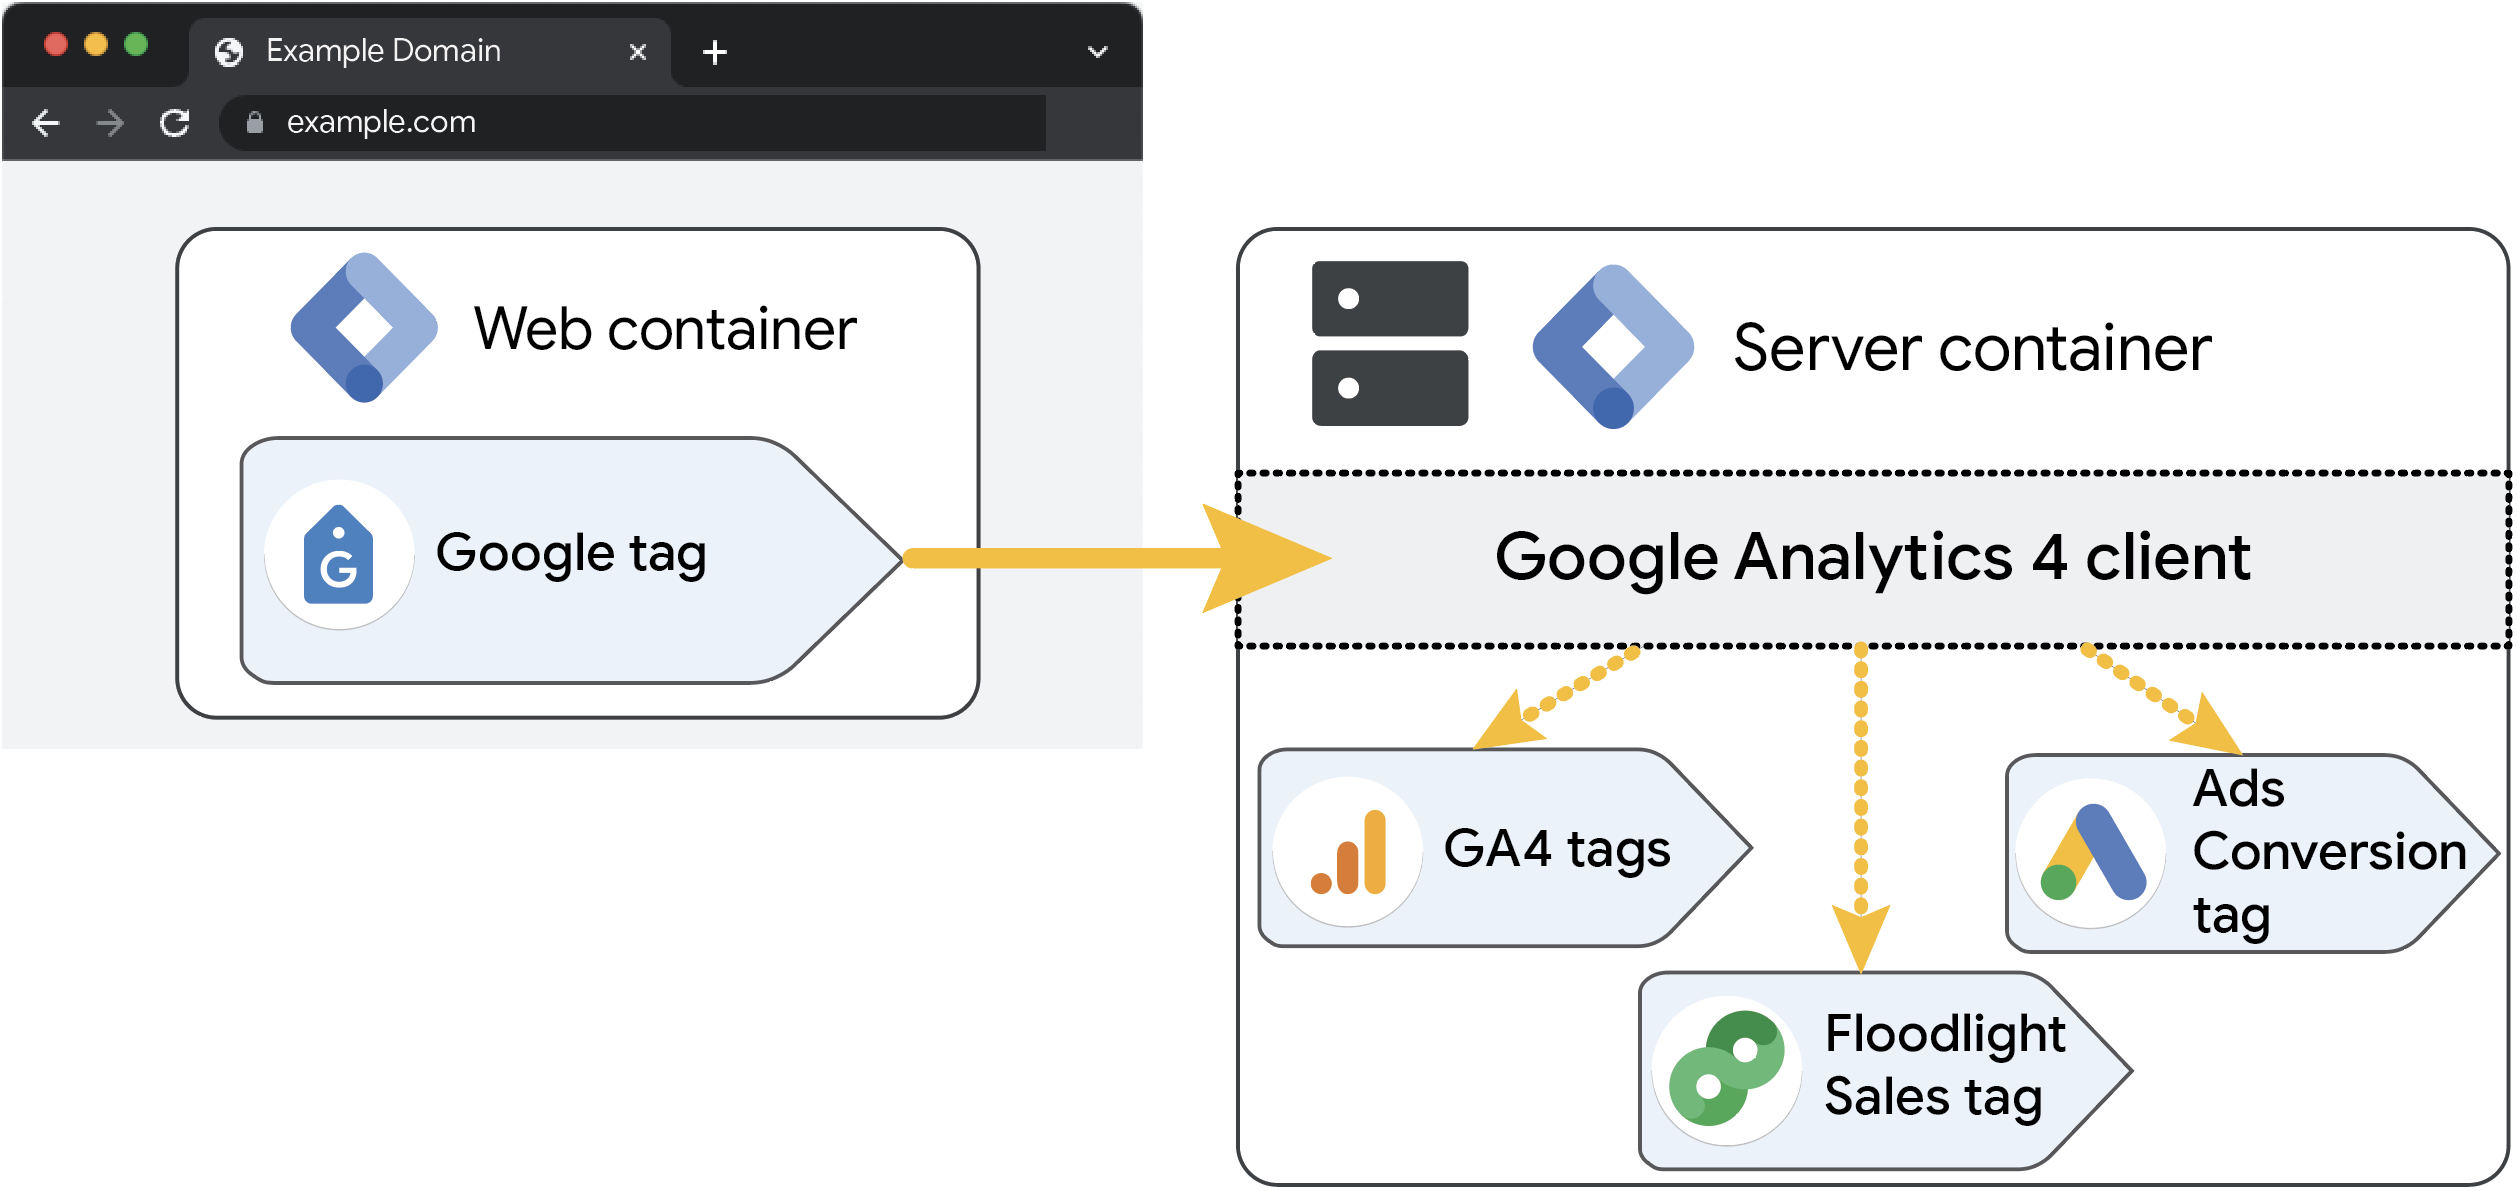 Diagram showing that the GA4 client can also trigger other Google tags, such as Ads and Floodlight in a server container.